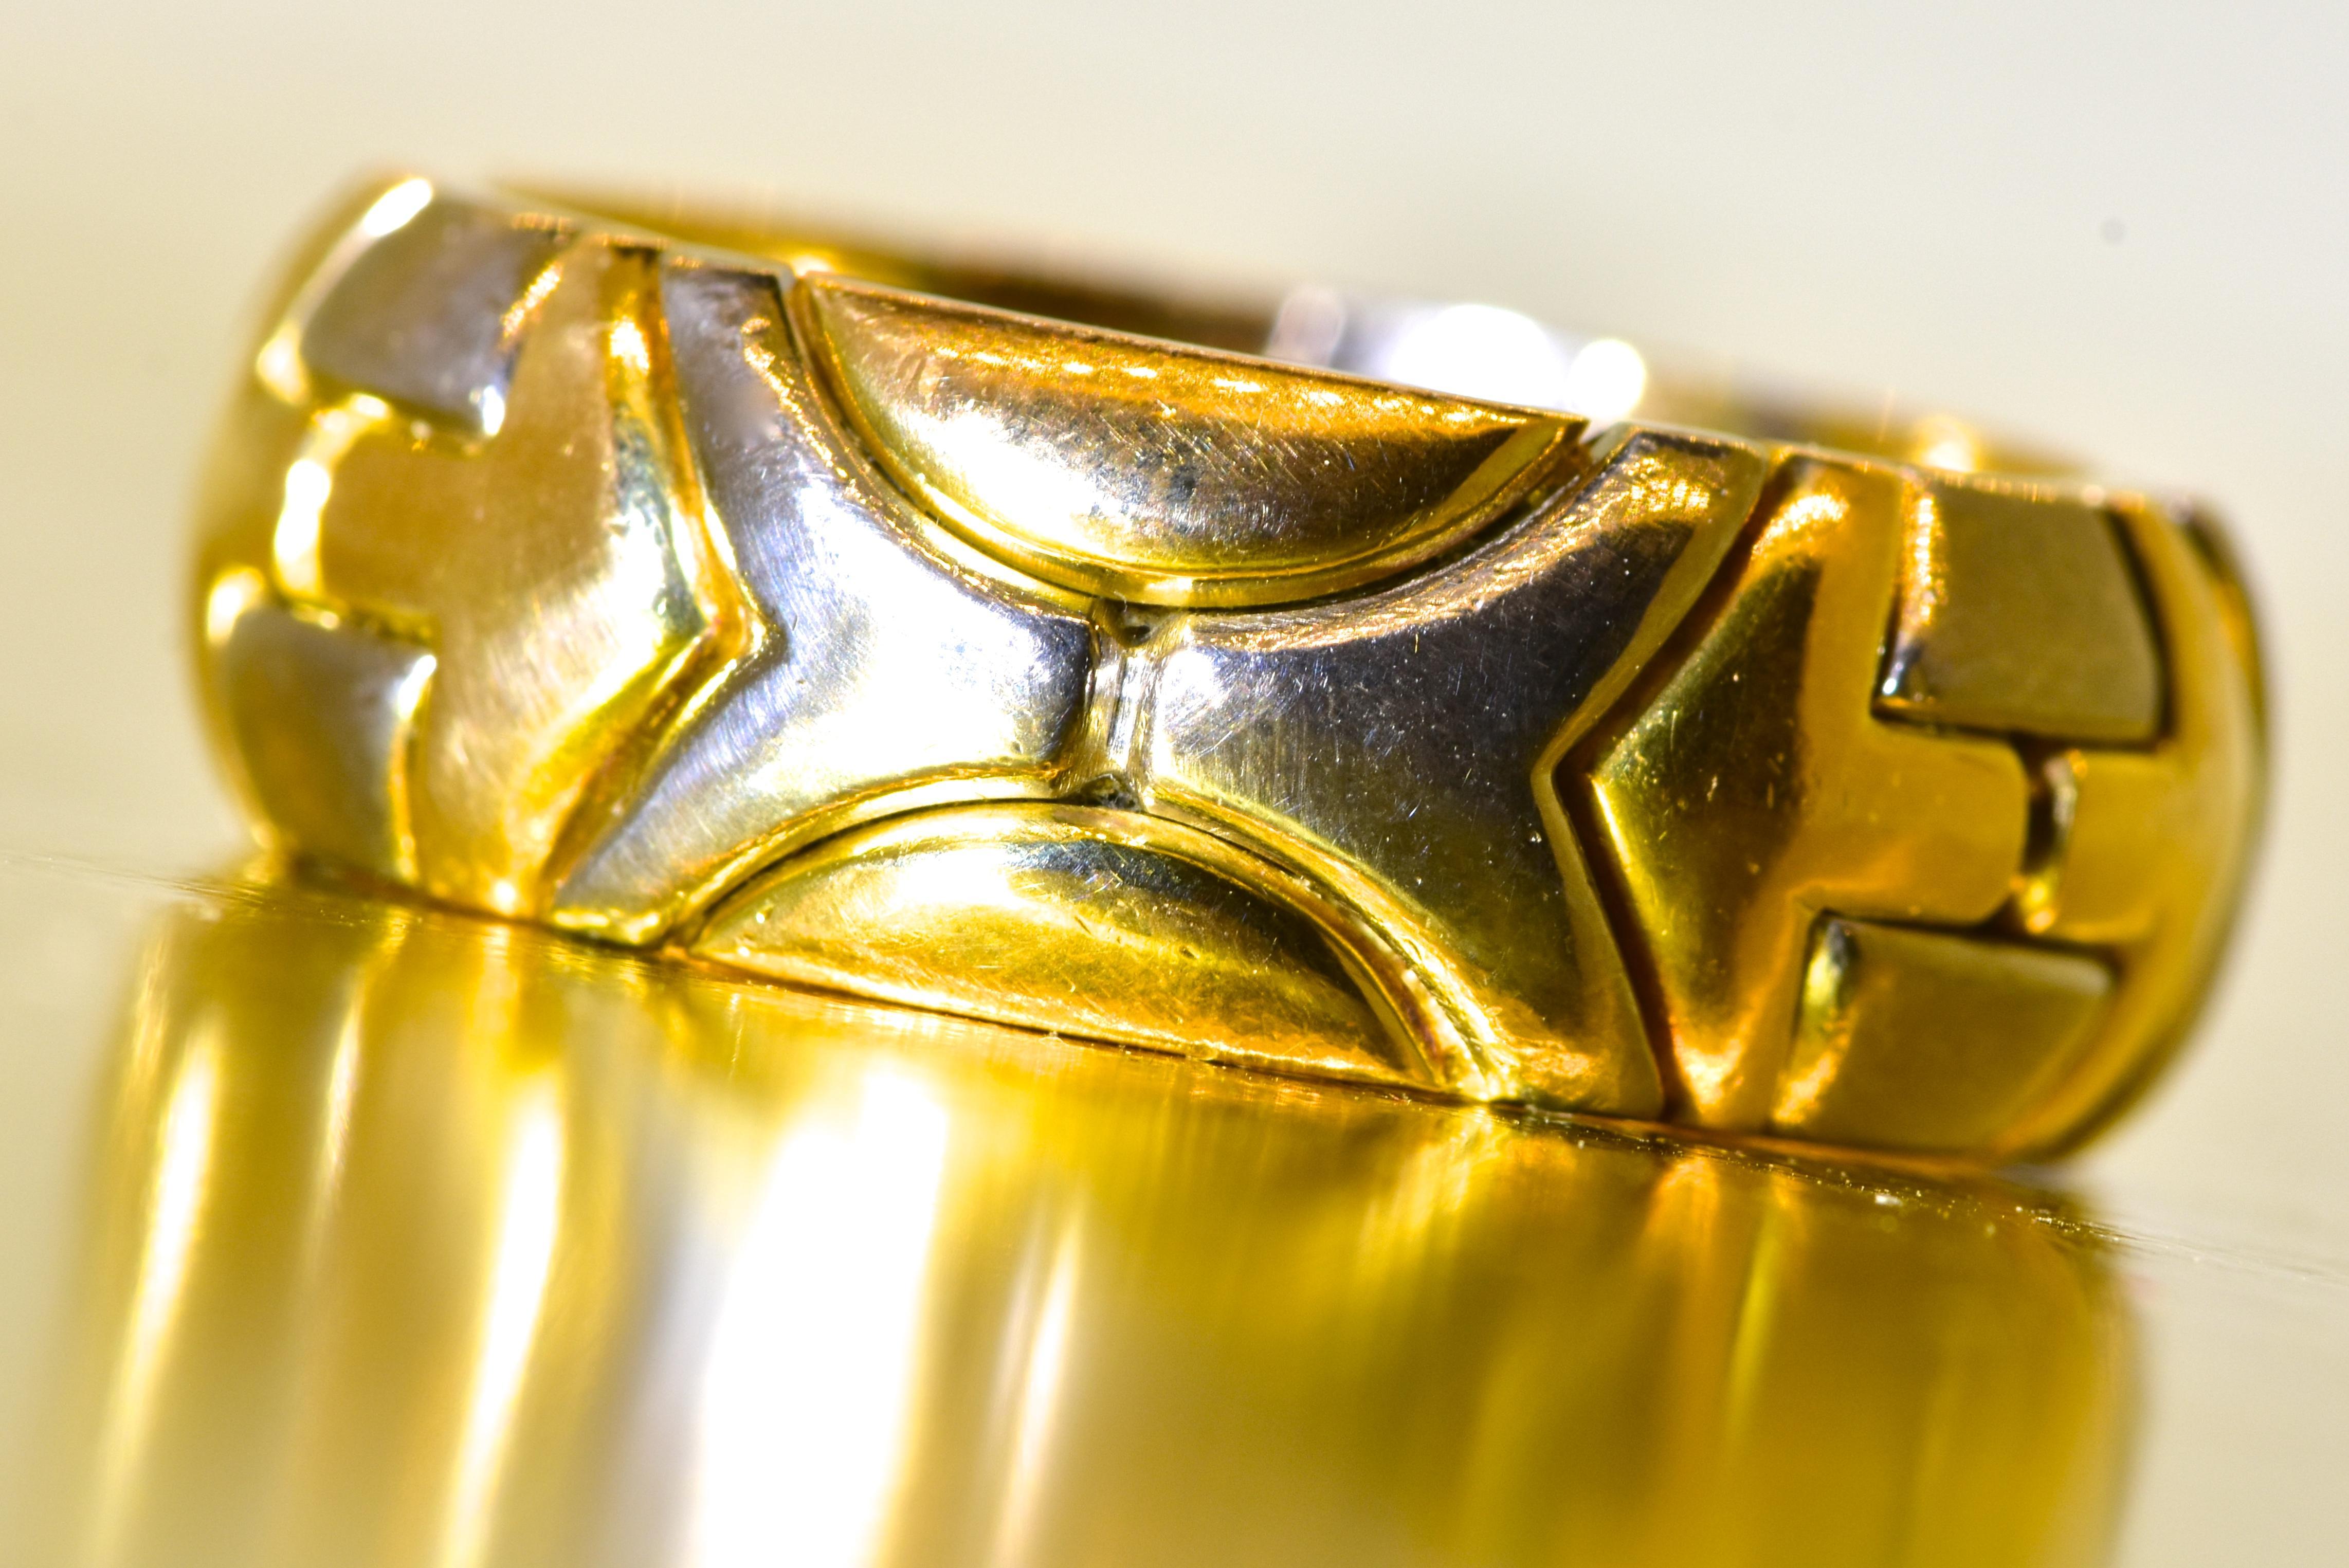 Women's 18K Yellow Gold and Darkened Steel Vintage Band Ring, Italy, c. 1990.